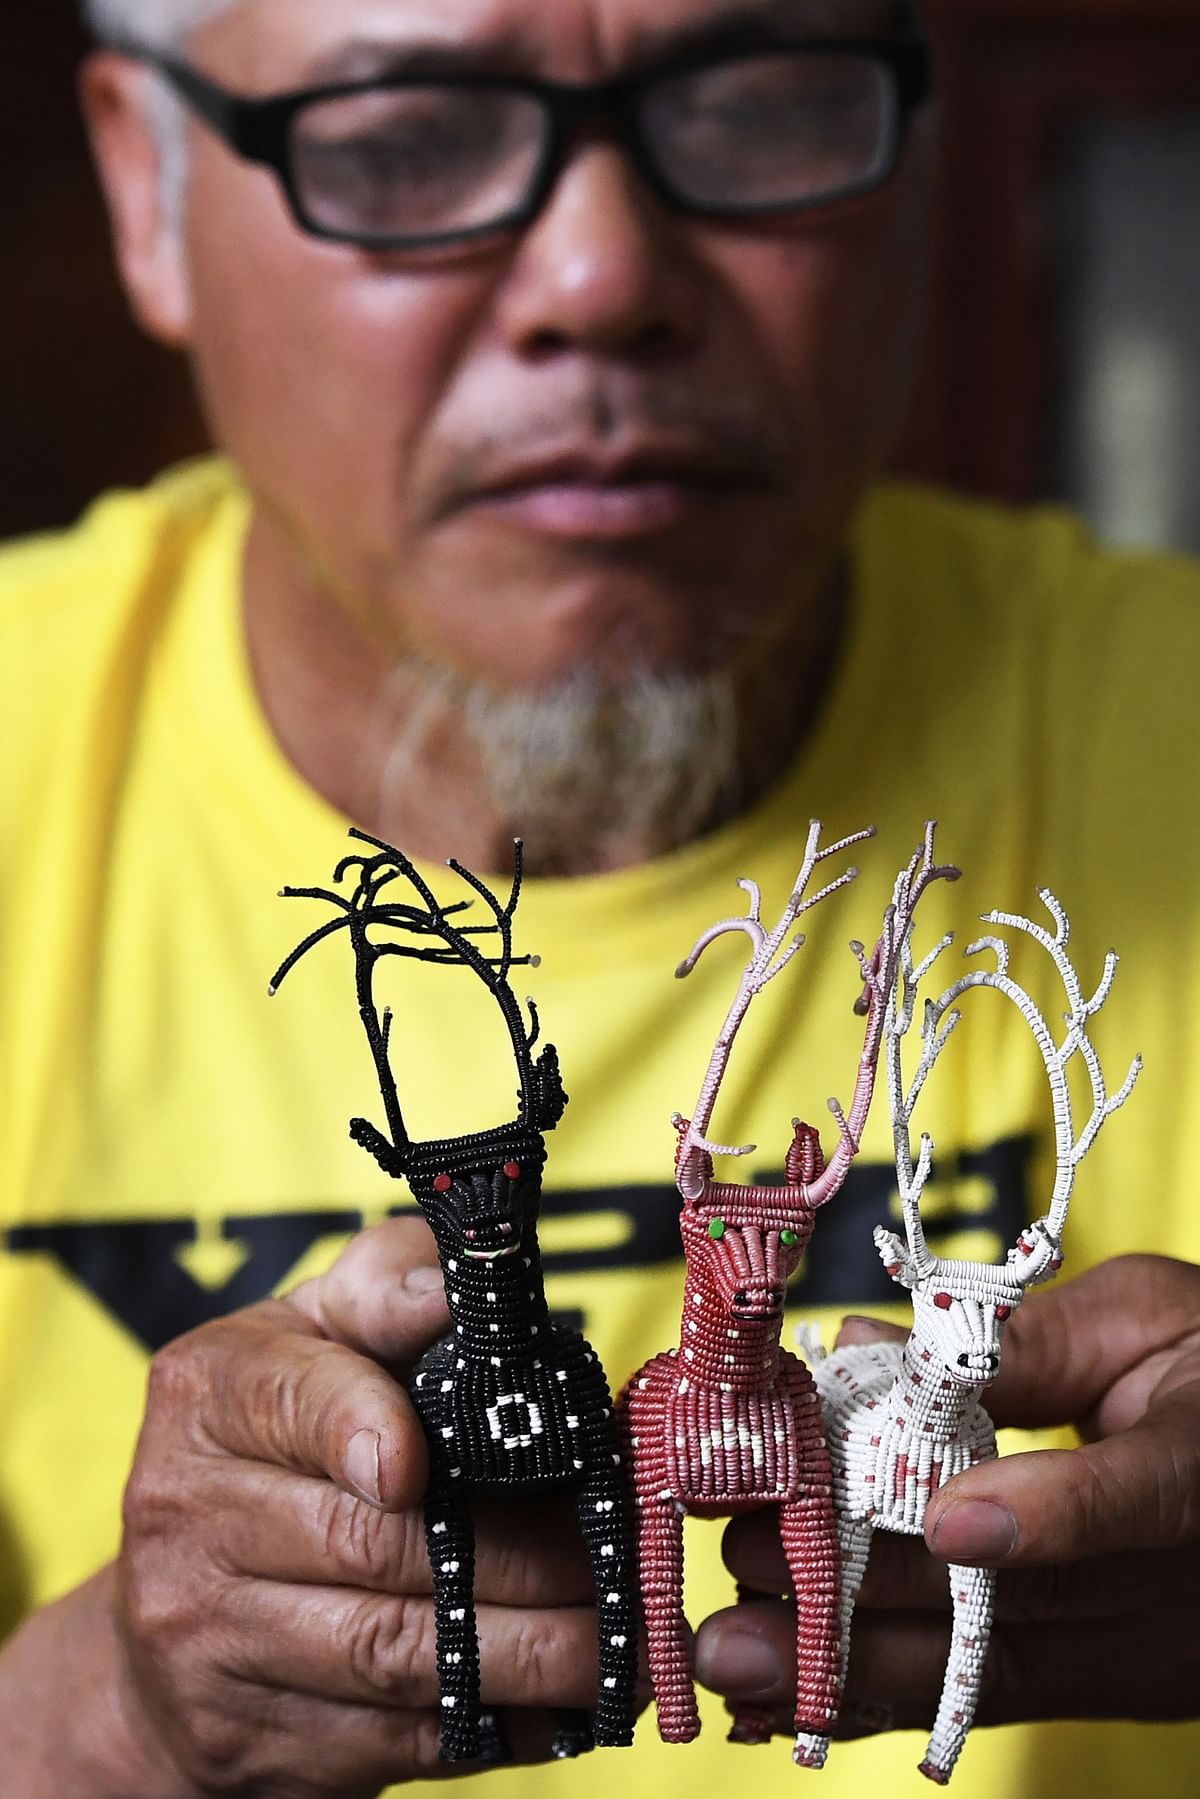 This picture taken on 24 April 2018 shows Nguyen Truong Chinh displaying intricately crafted animals made from plastic bags by his son and death row inmate Nguyen Van Chuong, during an interview with AFP at his home in Hai Duong. Photo: AFP